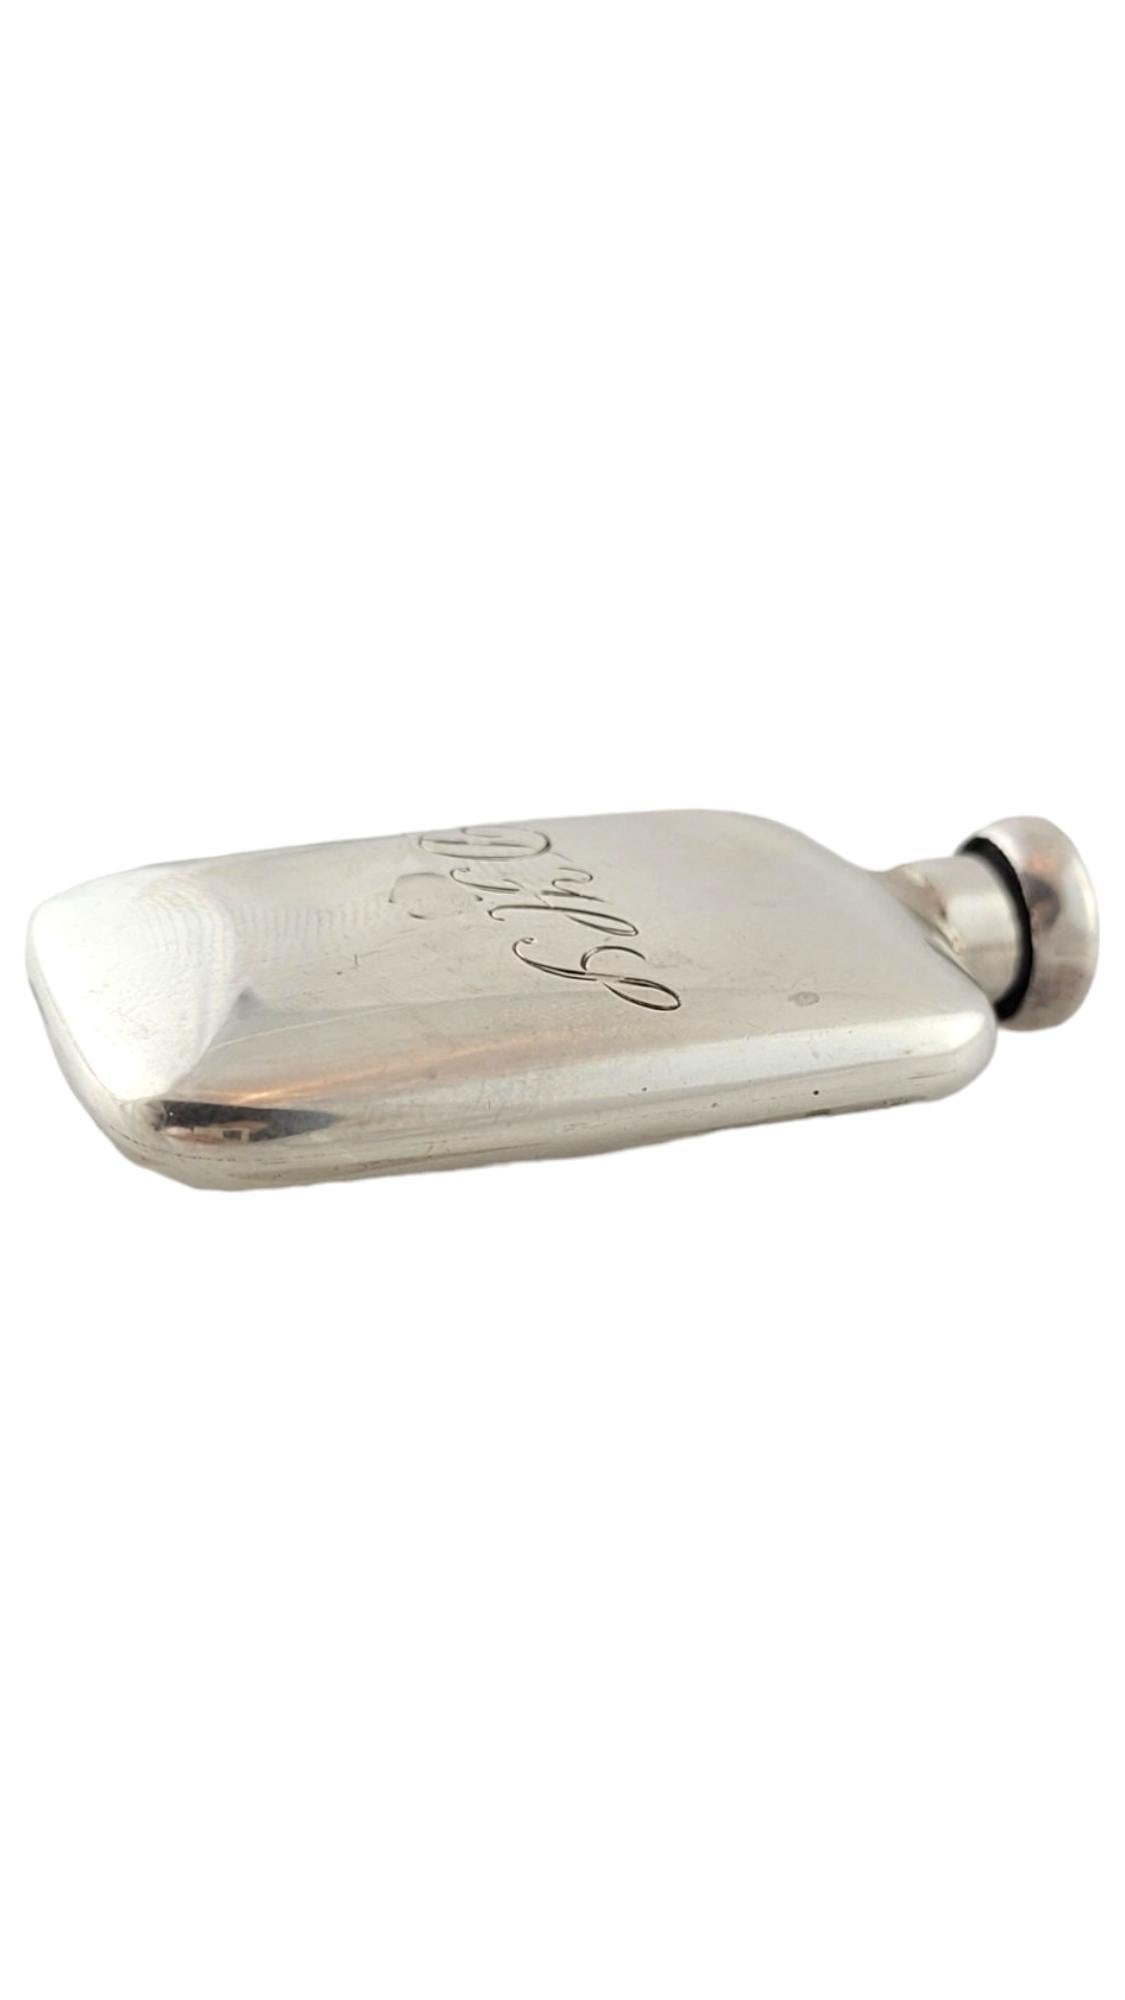 Vintage Tiffany & Co. Sterling Silver Engraved Perfume Flask #17411 In Good Condition For Sale In Washington Depot, CT